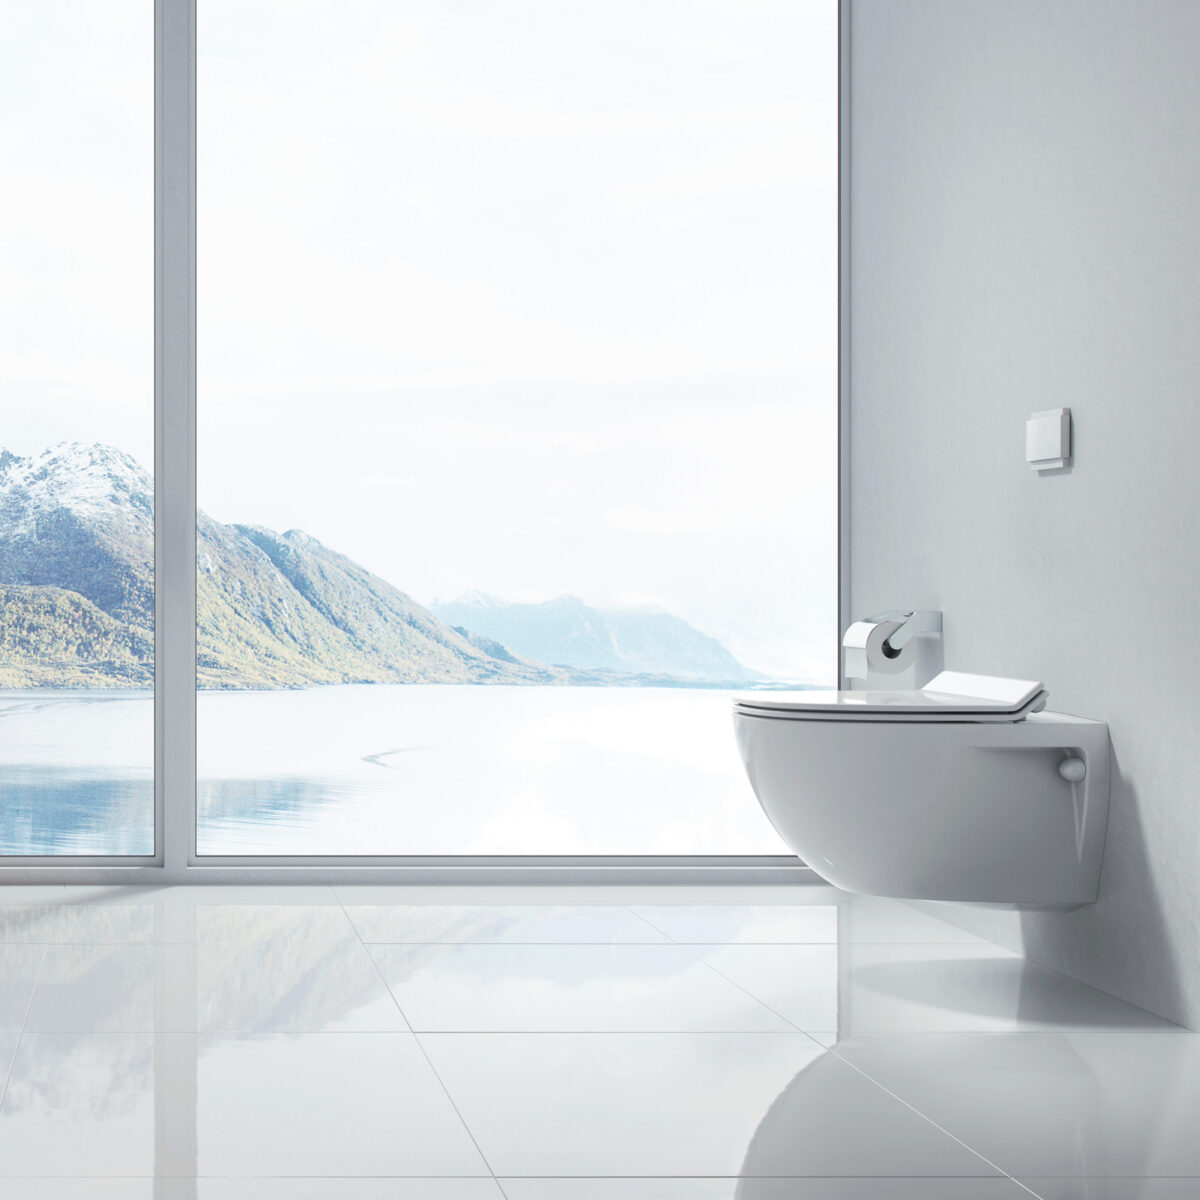 Jets image 3 D interior toilet porcelain wall Jade CAB CON Mountains Fjord Ocean Fire Grader Firegrader Getty Images WEB